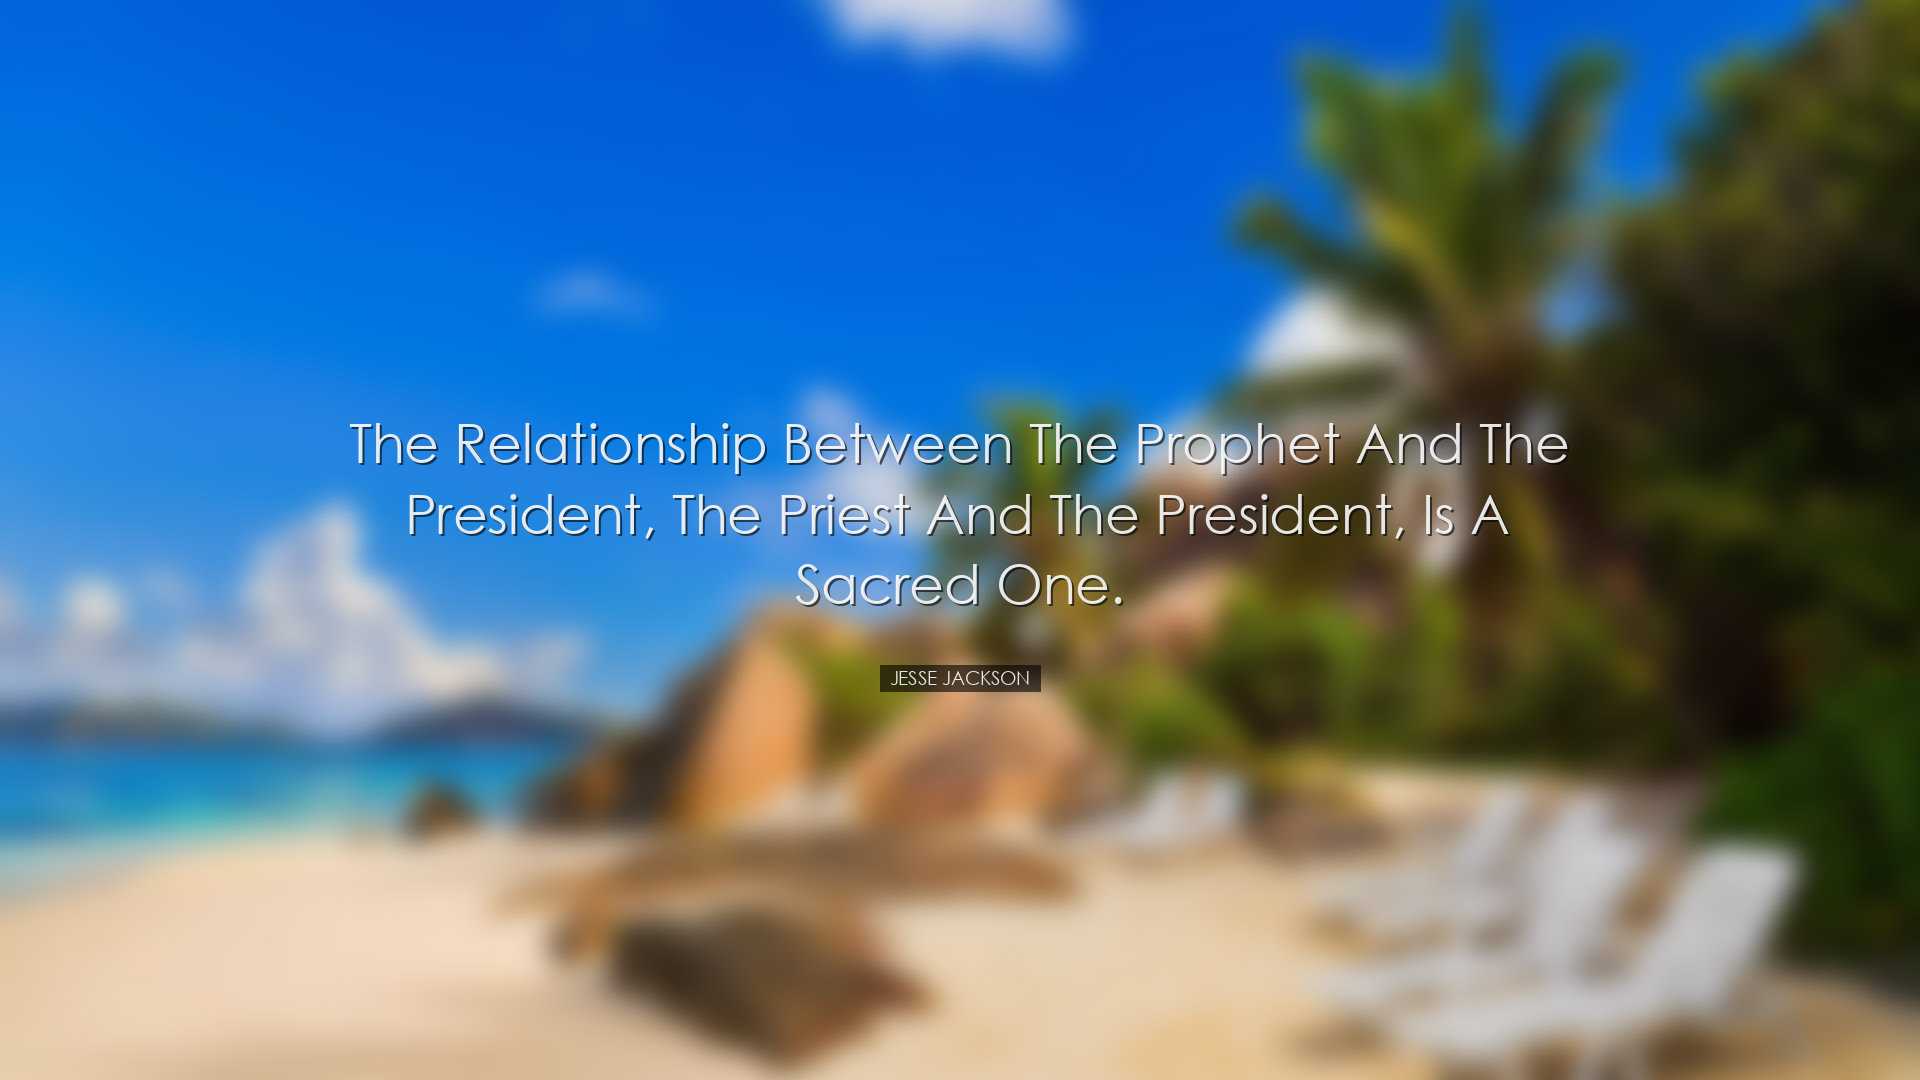 The relationship between the prophet and the President, the priest